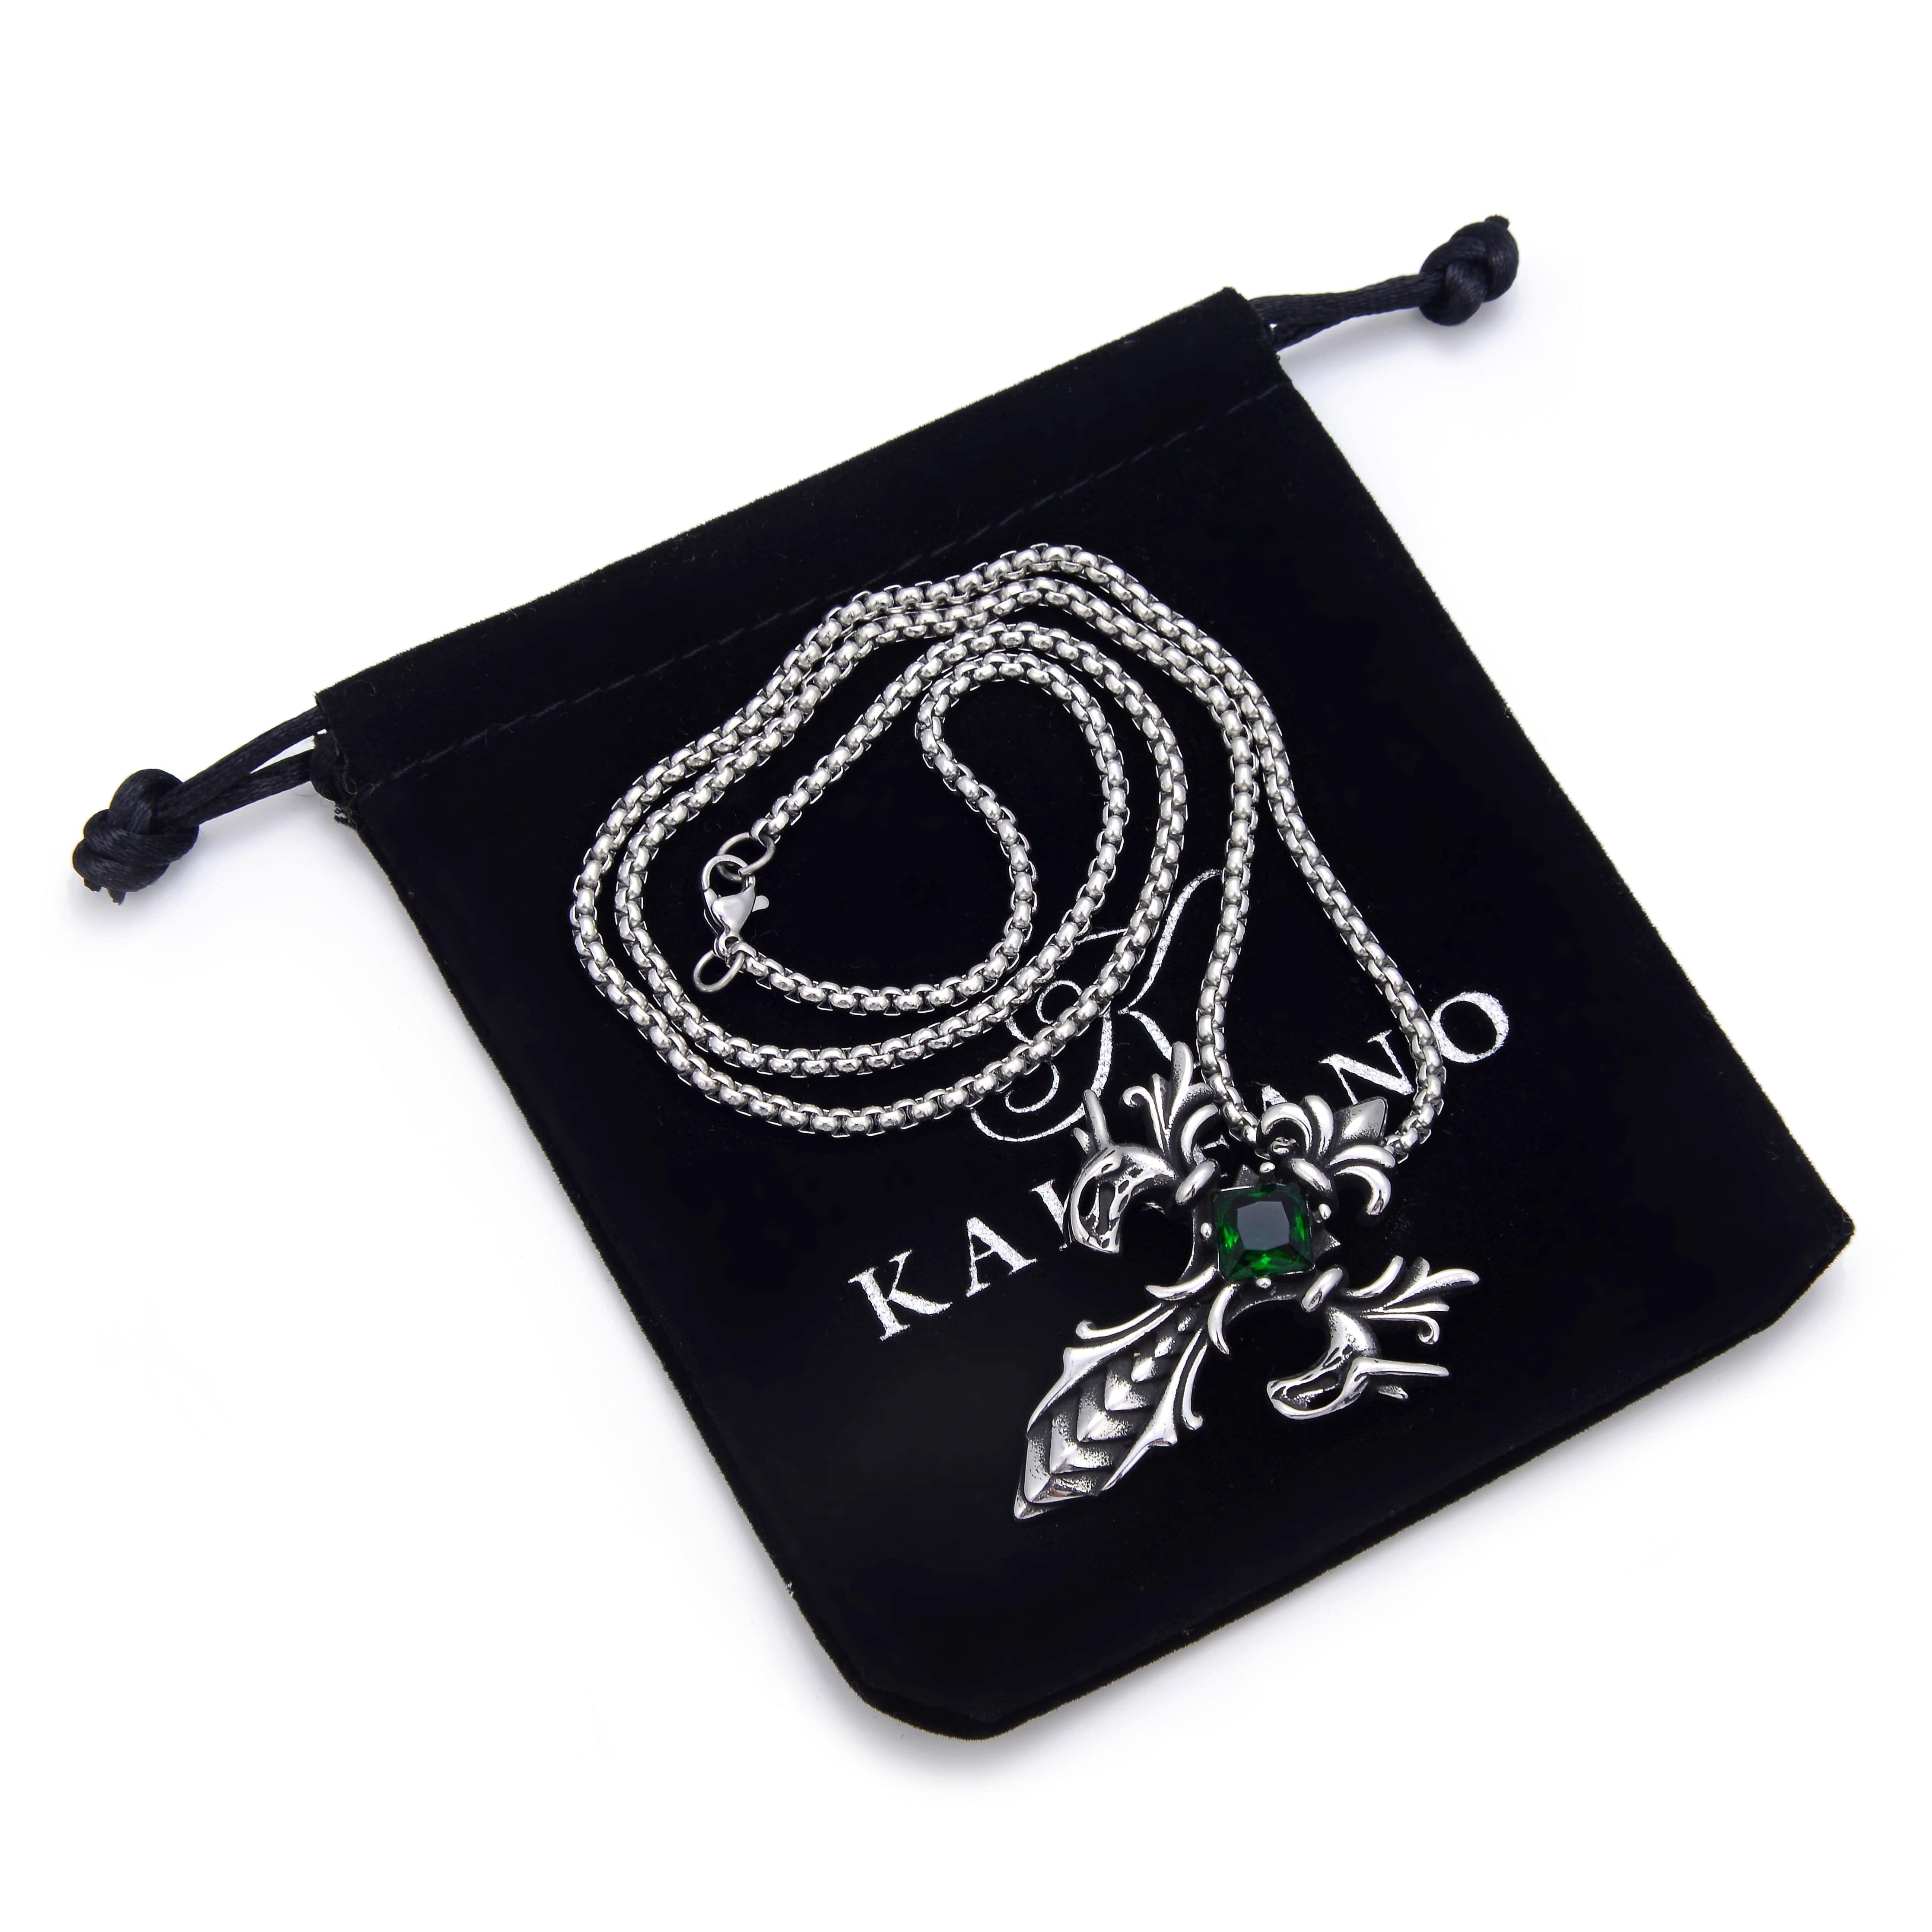 Kalifano Steel Hearts Jewelry Steel Hearts Acorn Flared Cross with Green Crystal Necklace SHN120-110